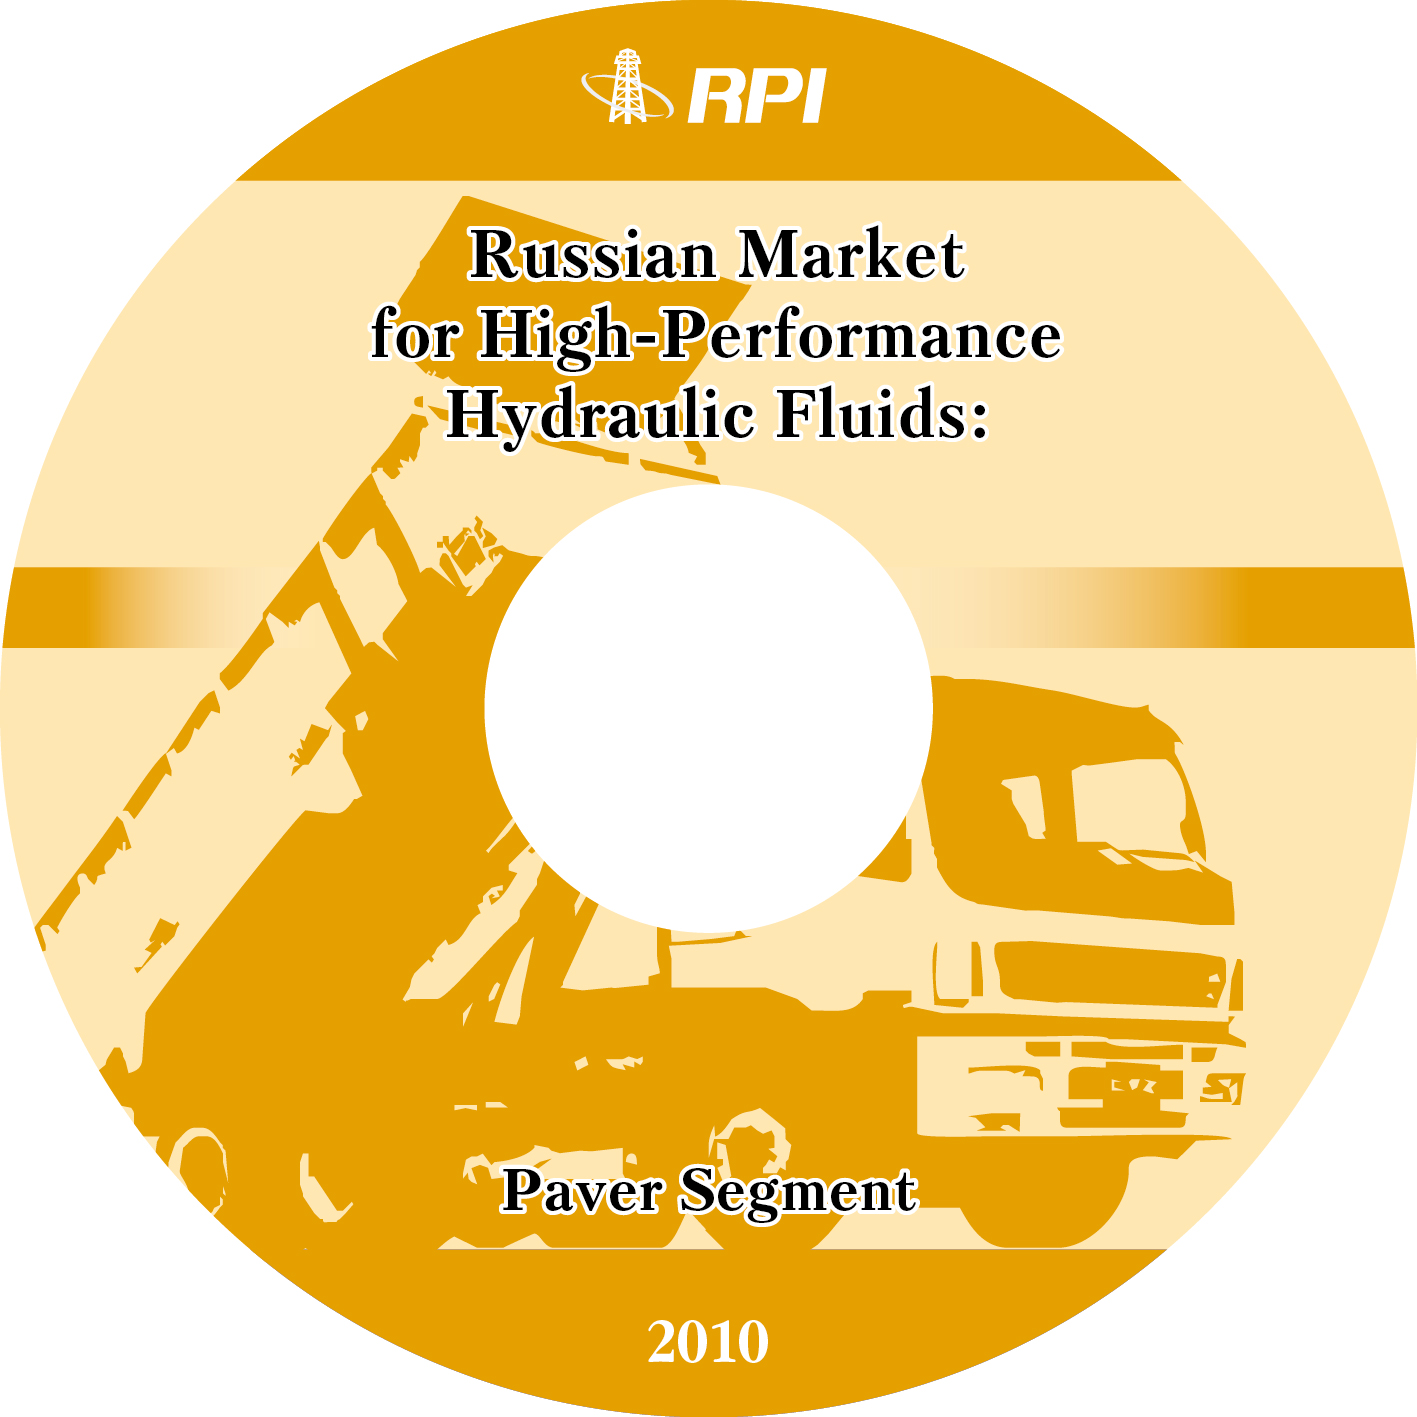 Russian Market for High-Performance Hydraulic Fluids: Pavers